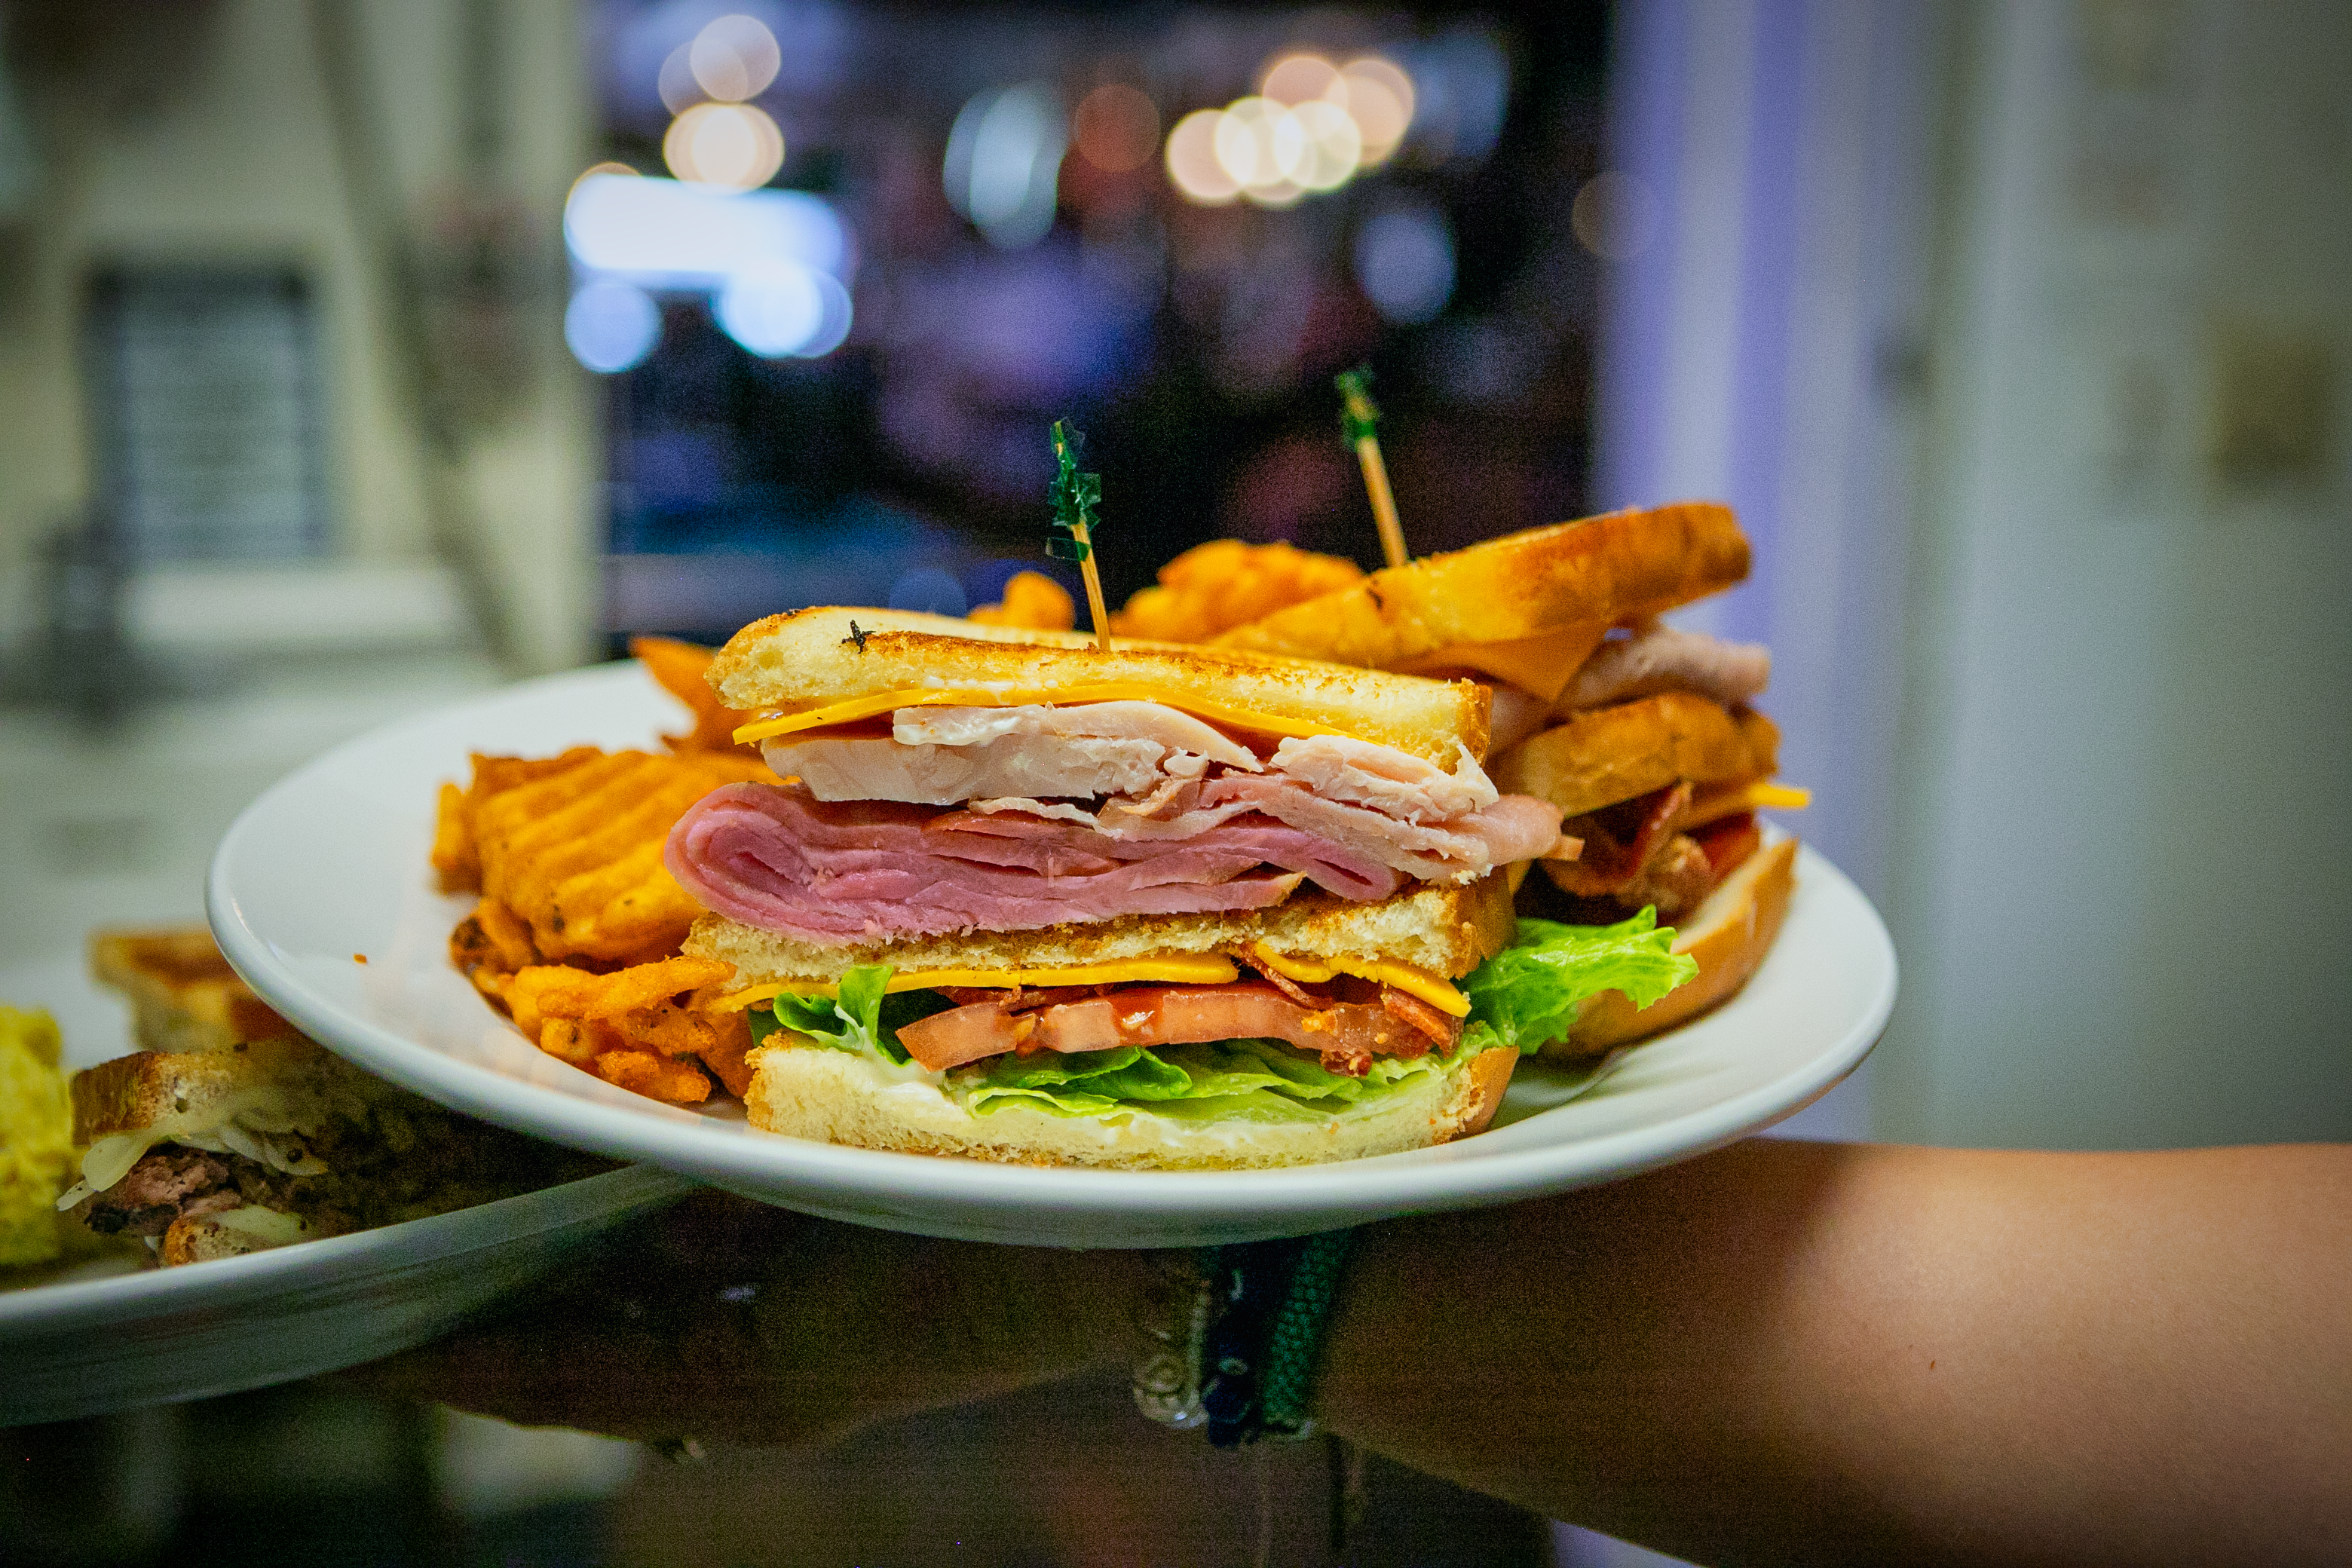 A triple decker sandwich of turkey, ham and bacon, with a side of fries and pickle